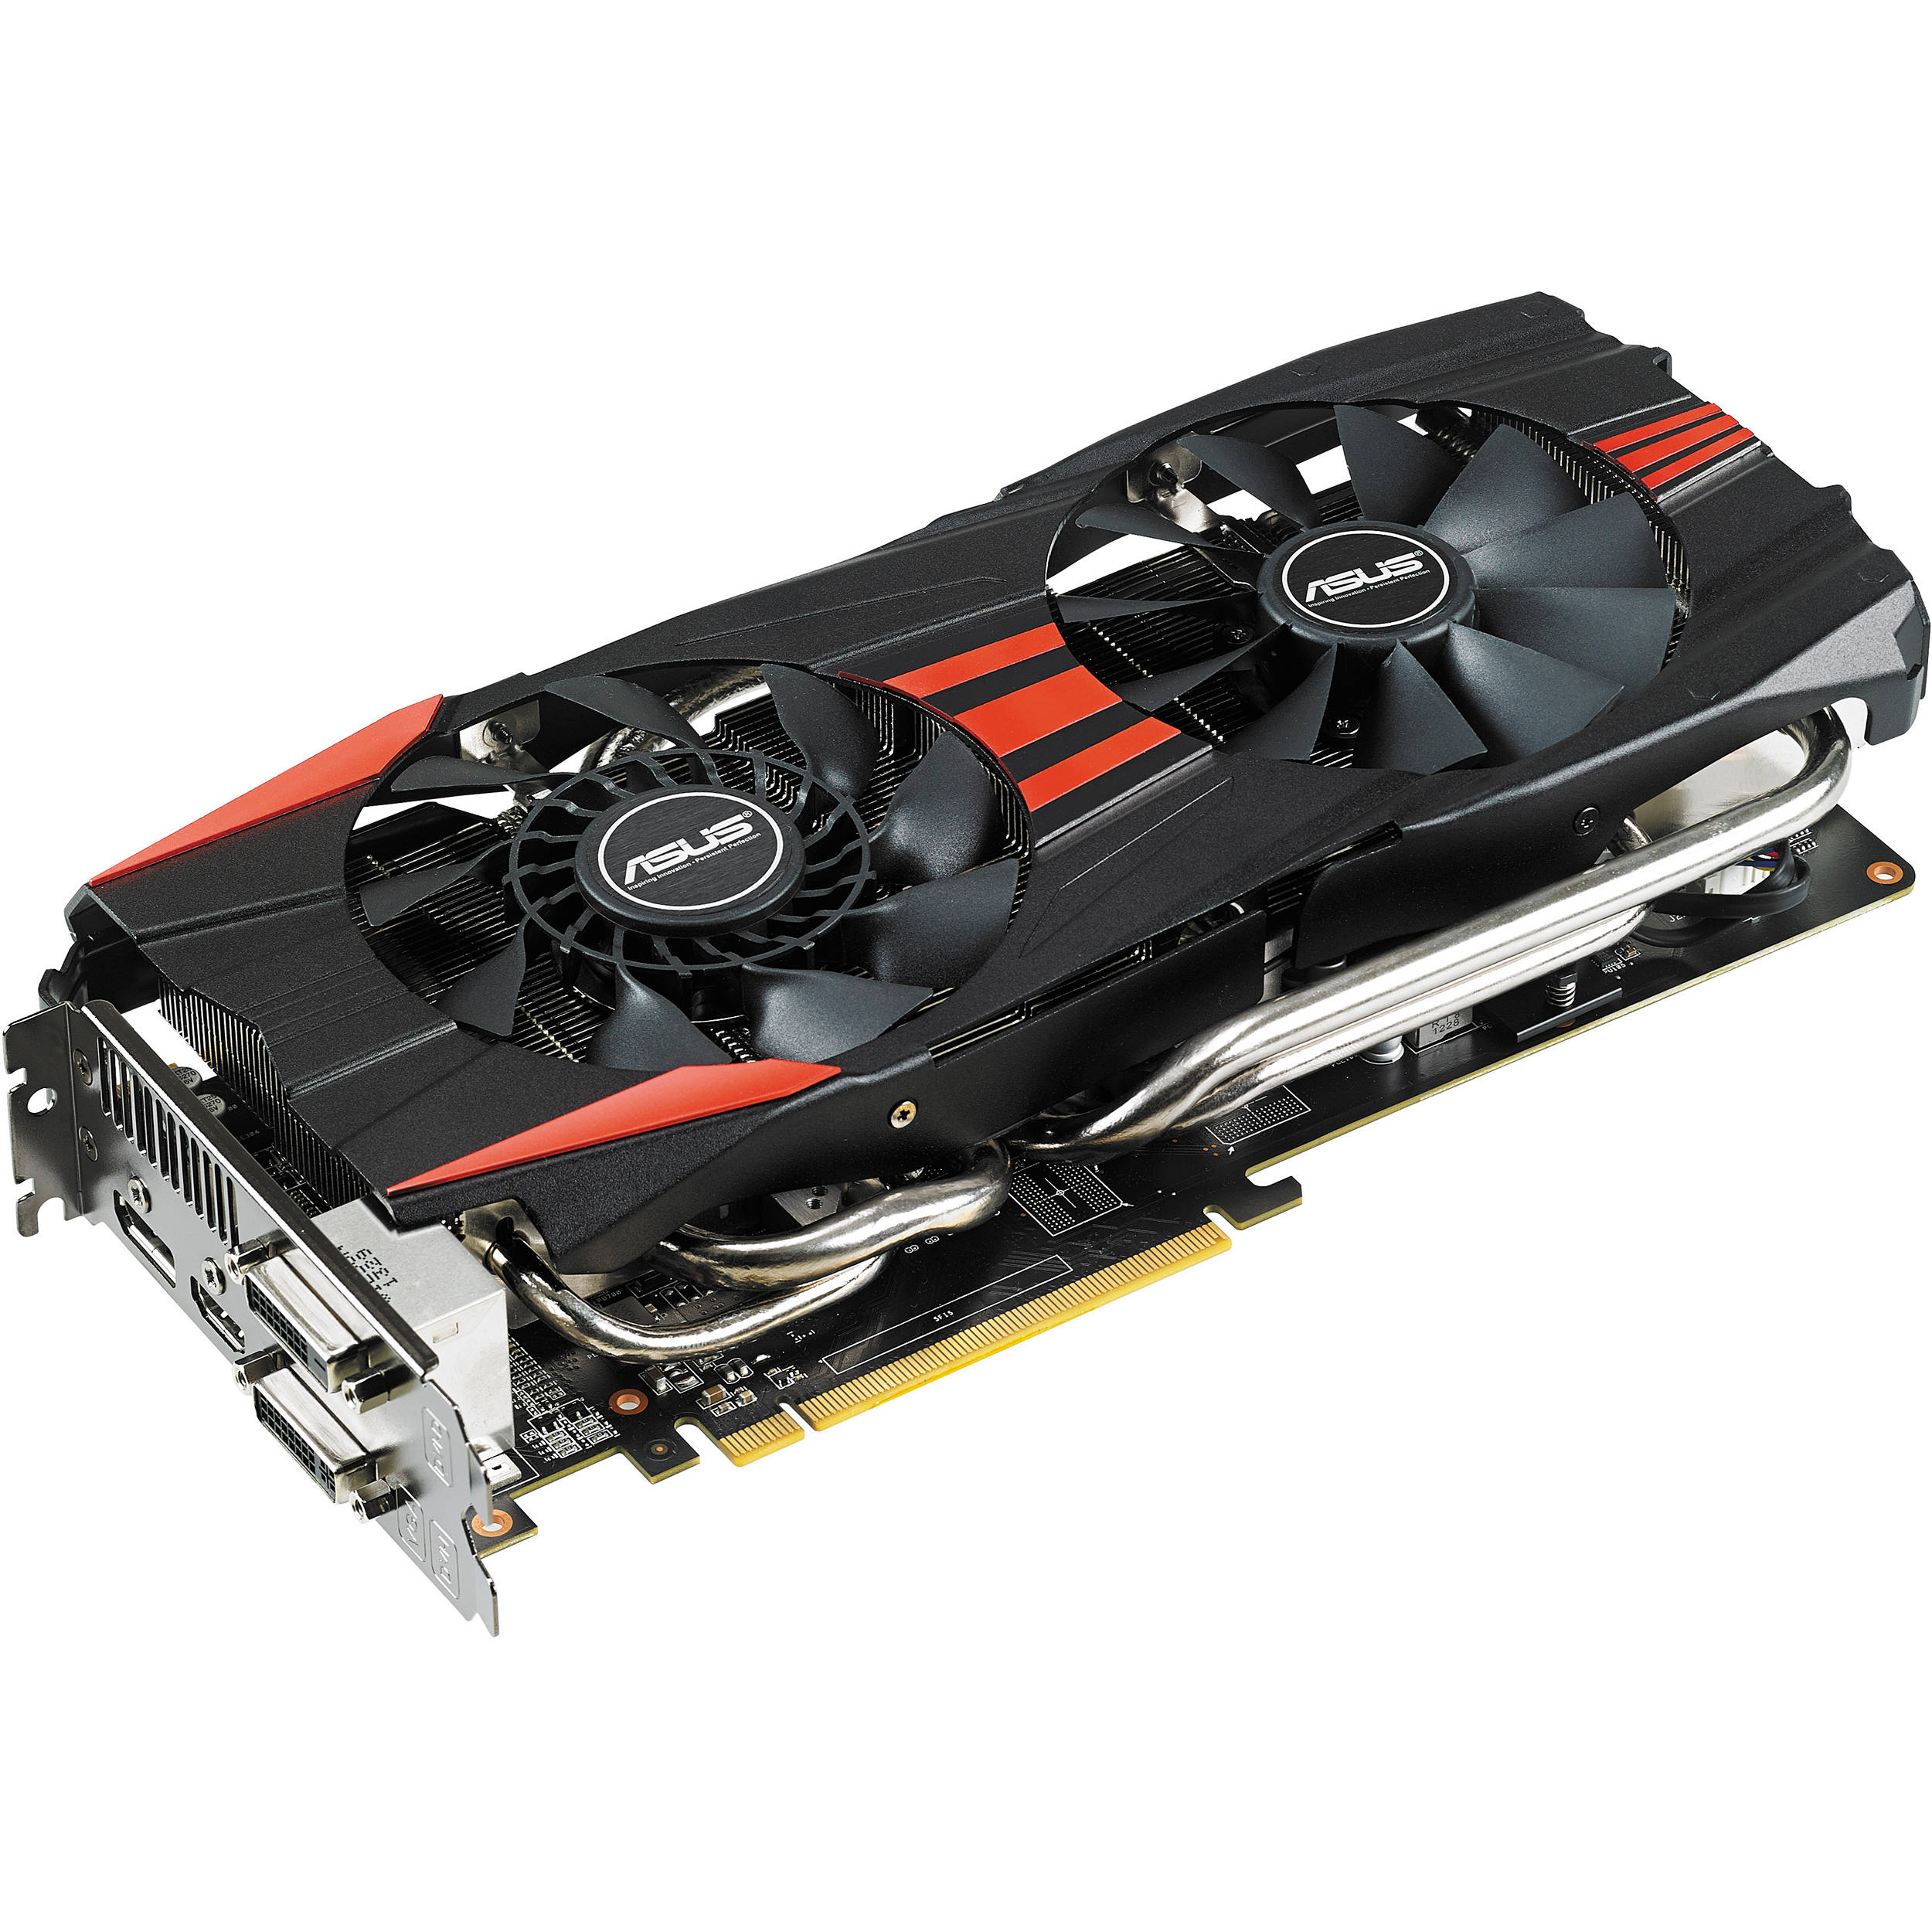 ASUS Radeon R9 280 Graphics Card with 